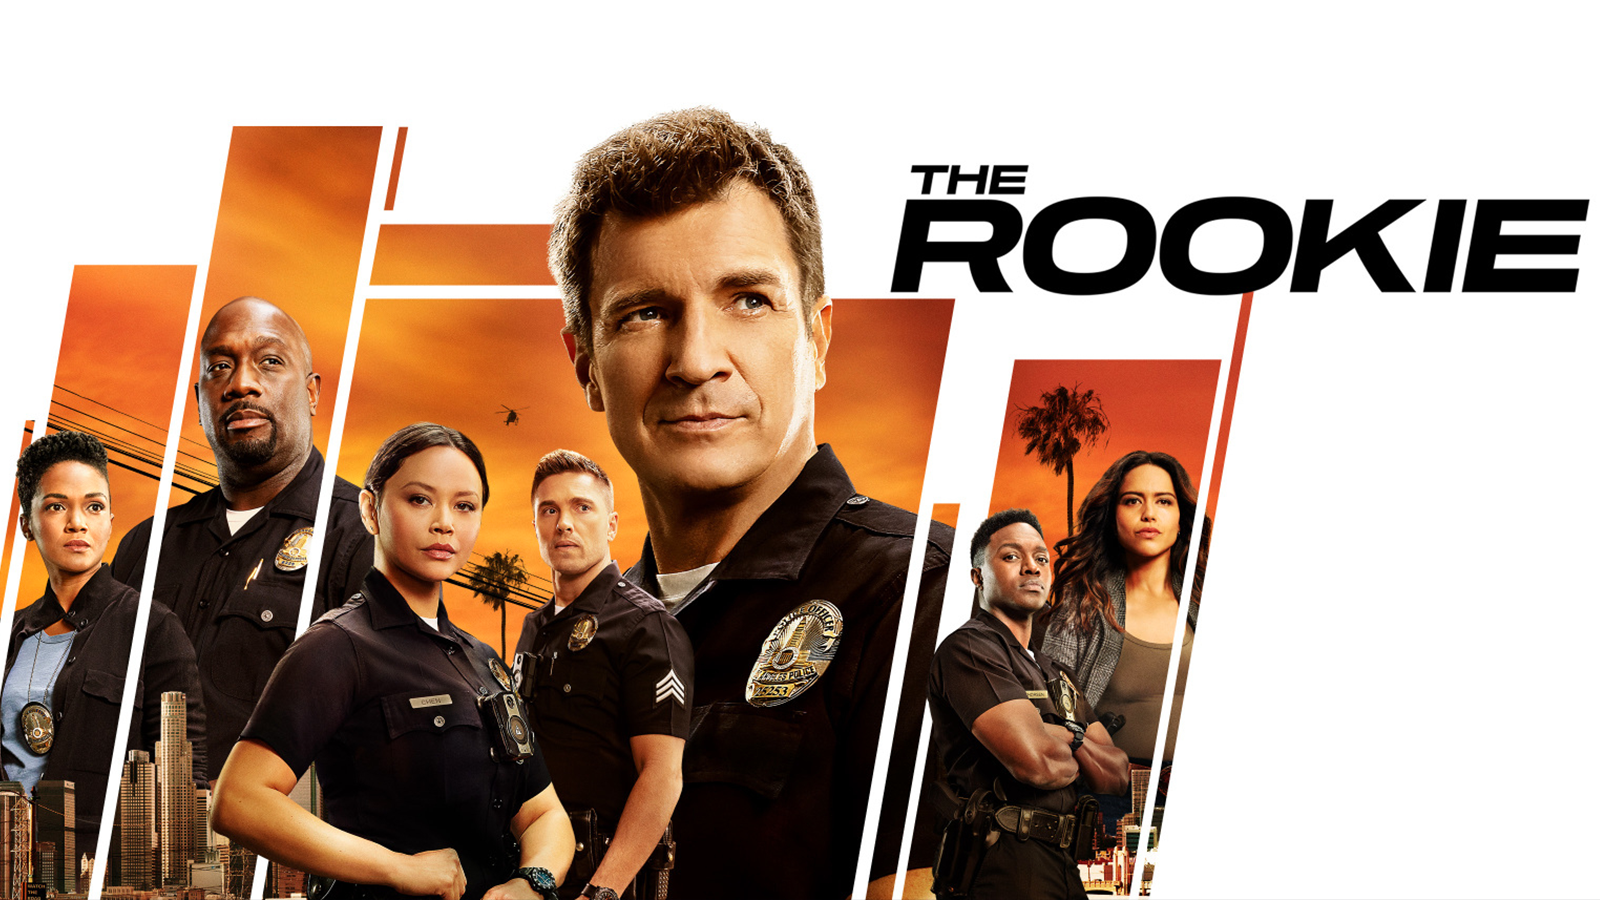 The Rookie Season 6 A Delayed Return to ABC in 2023